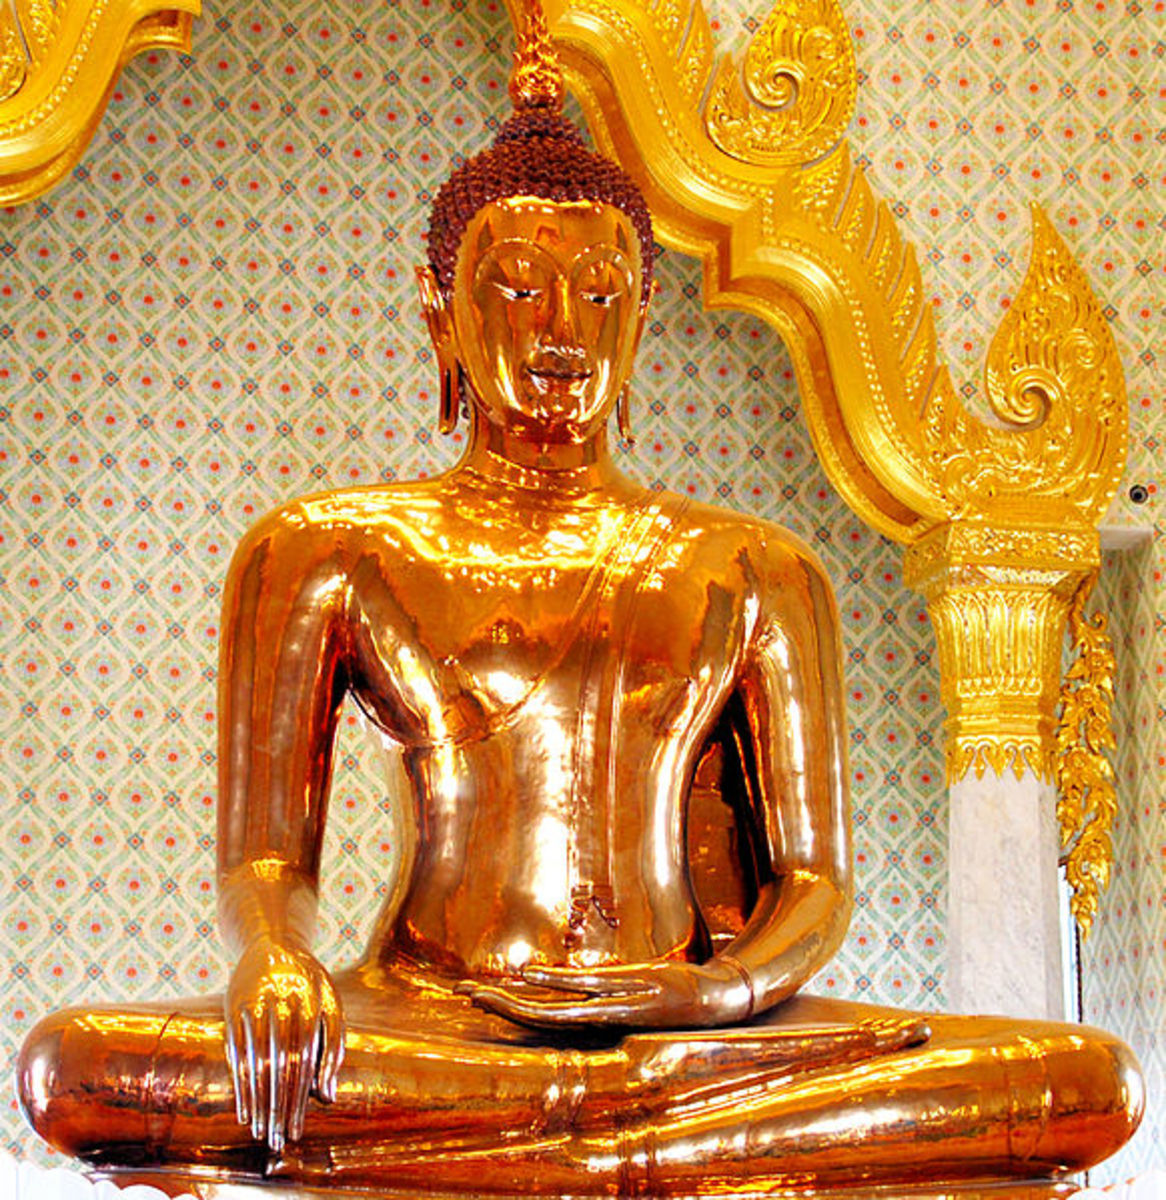 10-magnificent-statues-of-buddha-in-the-world